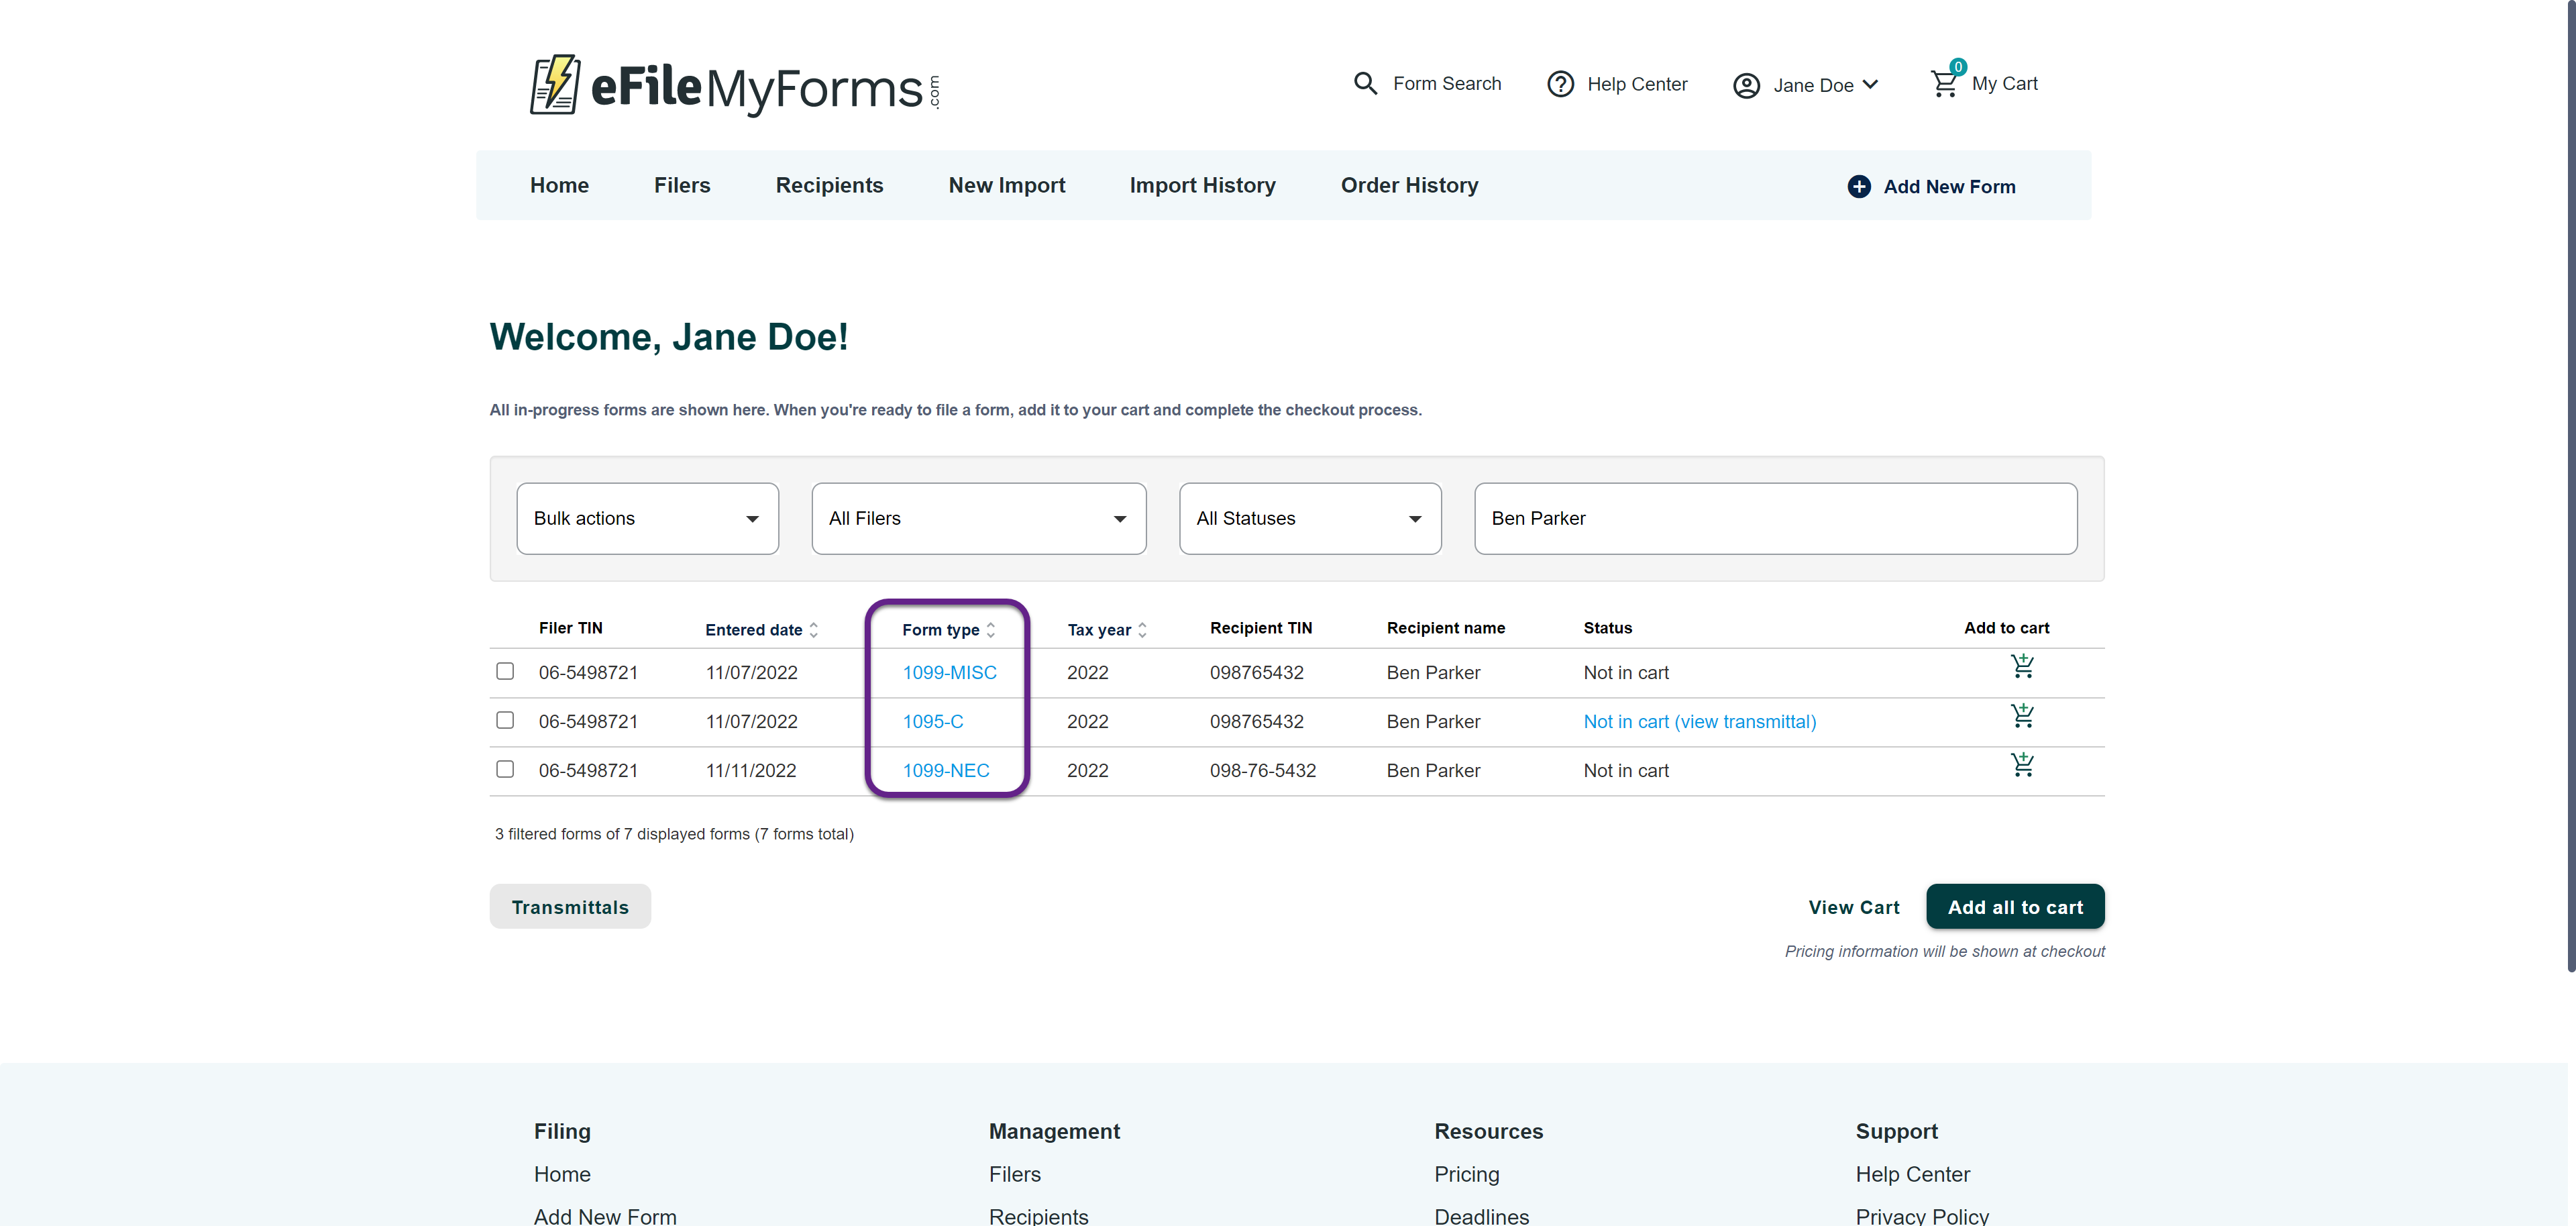 Image of the Home page with a callout on the Form Type column.